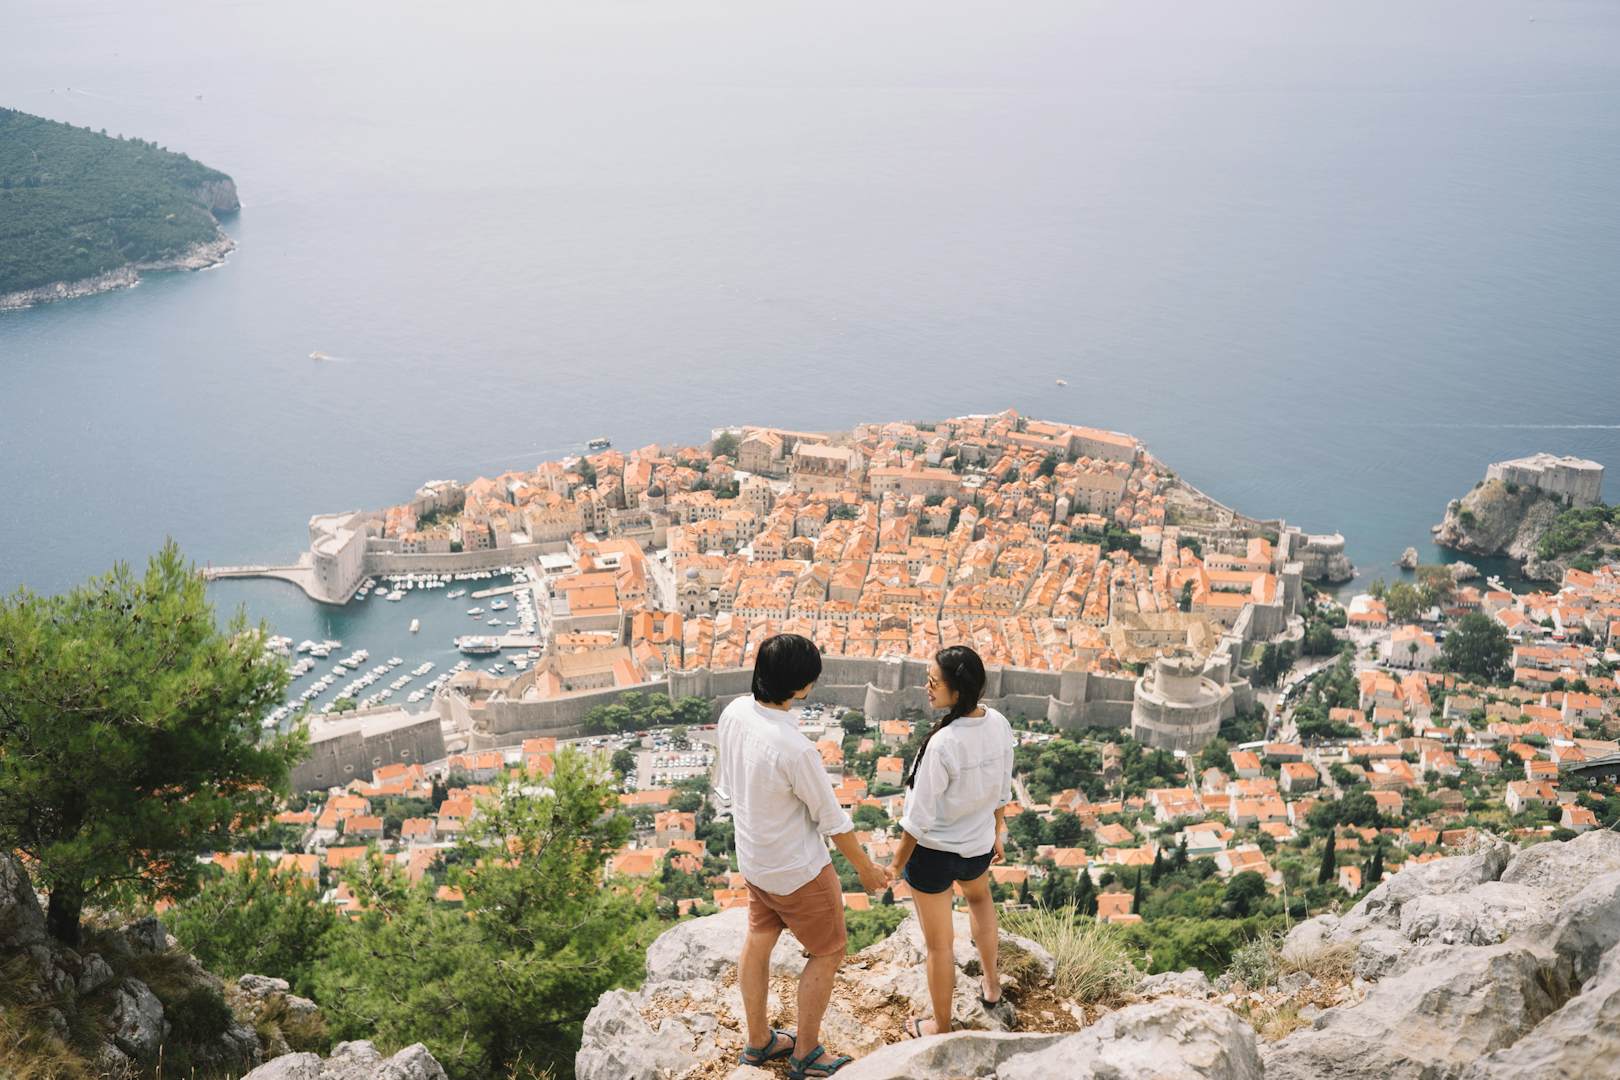 11 of the best free things to do in Dubrovnik